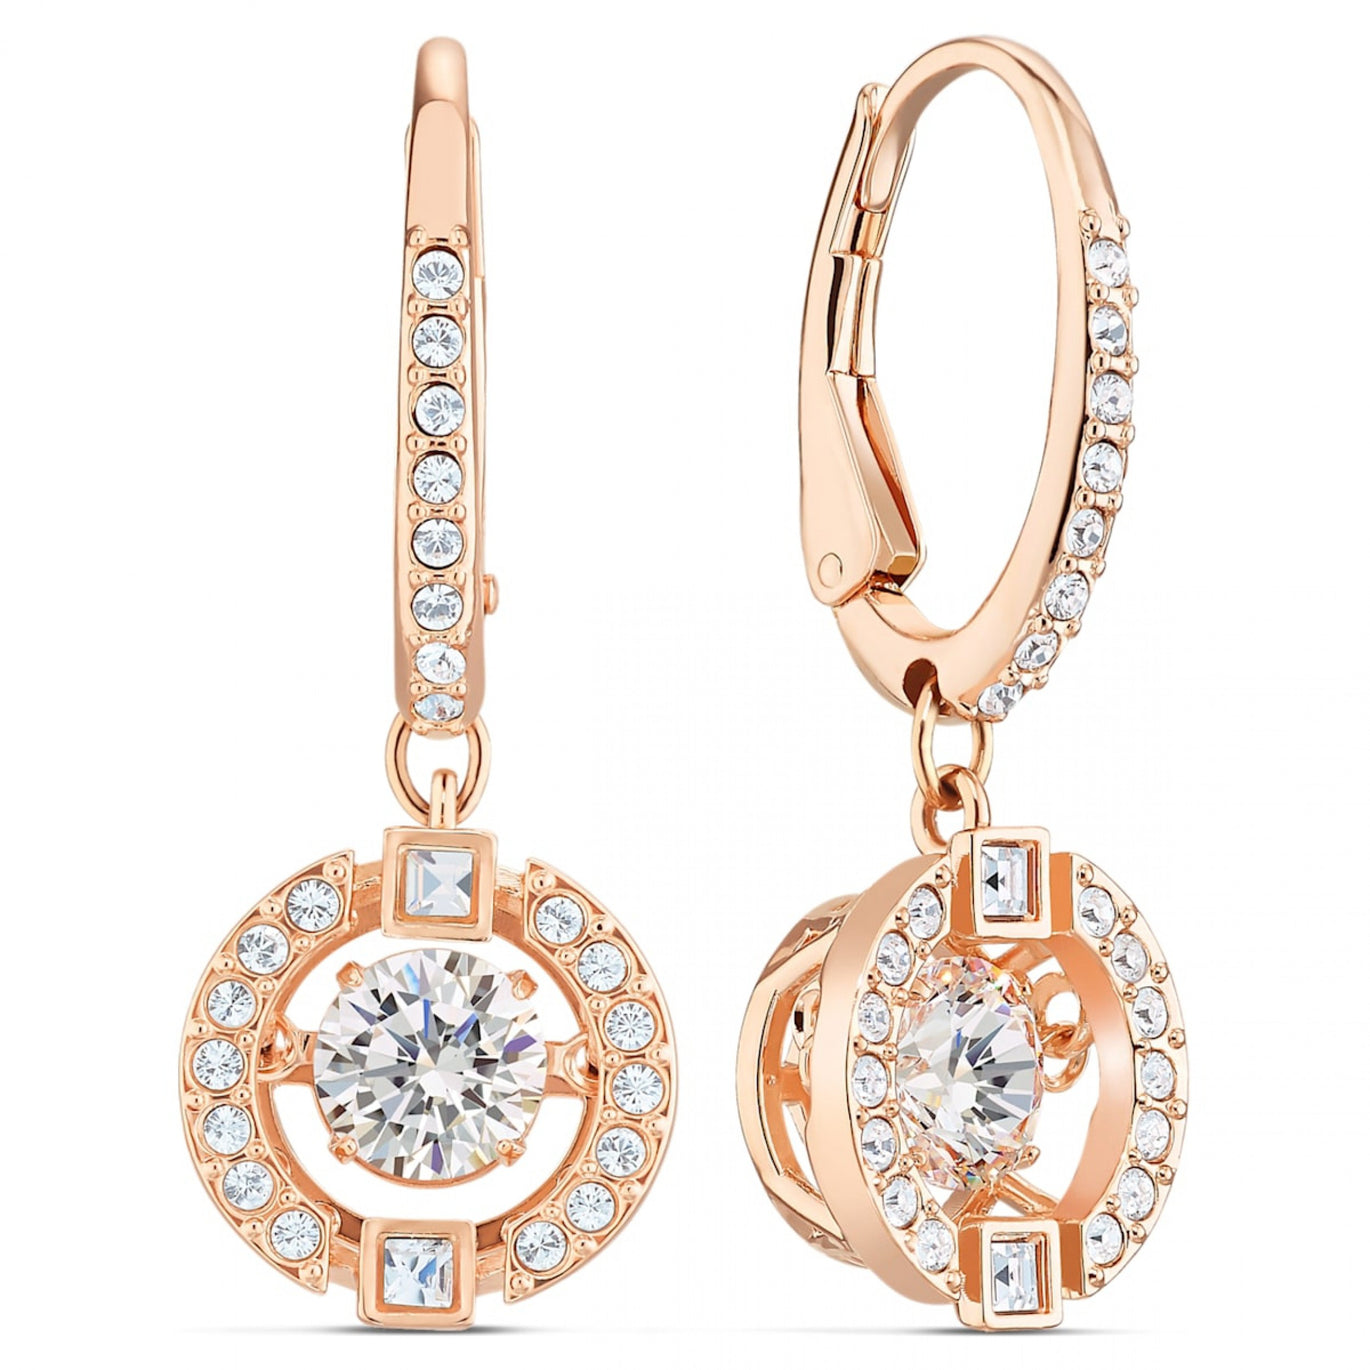 Swarovski Sparkling Dance Pierced Earrings White Rose Gold Tone Plated Free Delivery